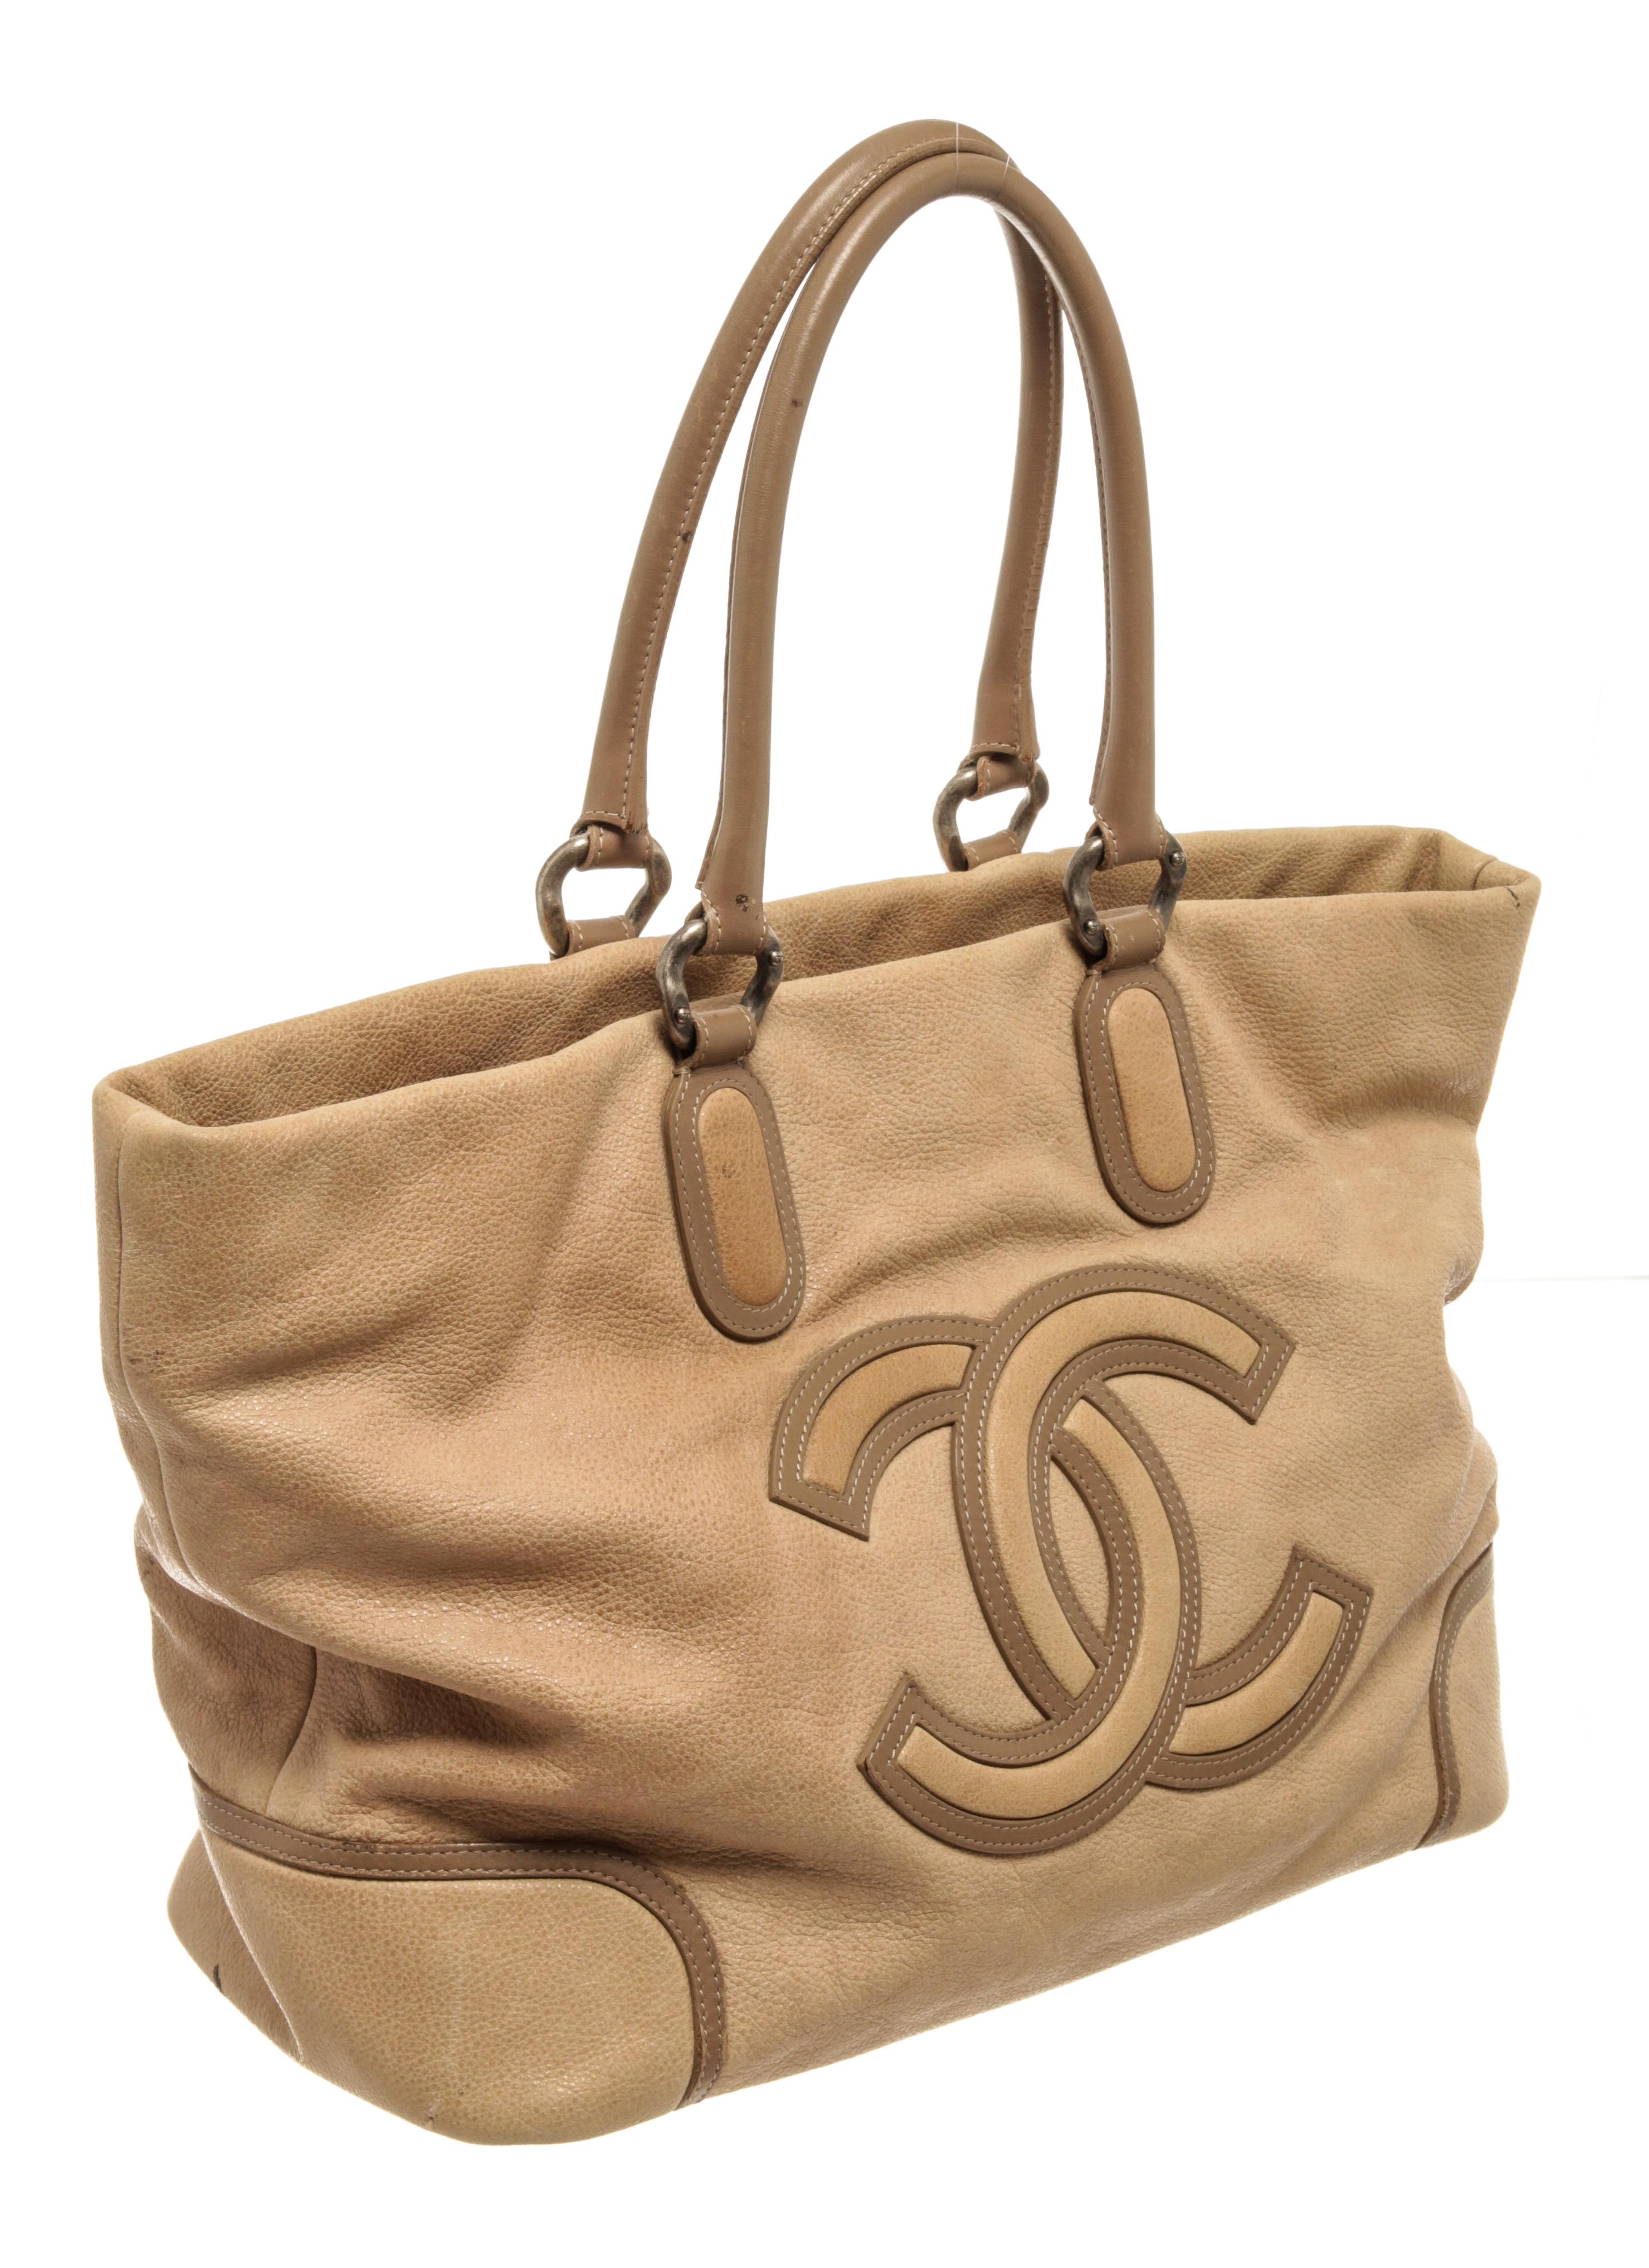 Chanel Beige Caviar Leather CC Cup Tote Bag with silver-tone hardware, metal foot base, leather trim, large CC interlocking logo at the front, black fabric lining, dual rolled leather handles, and zipper closure at the top.

75208MSC.